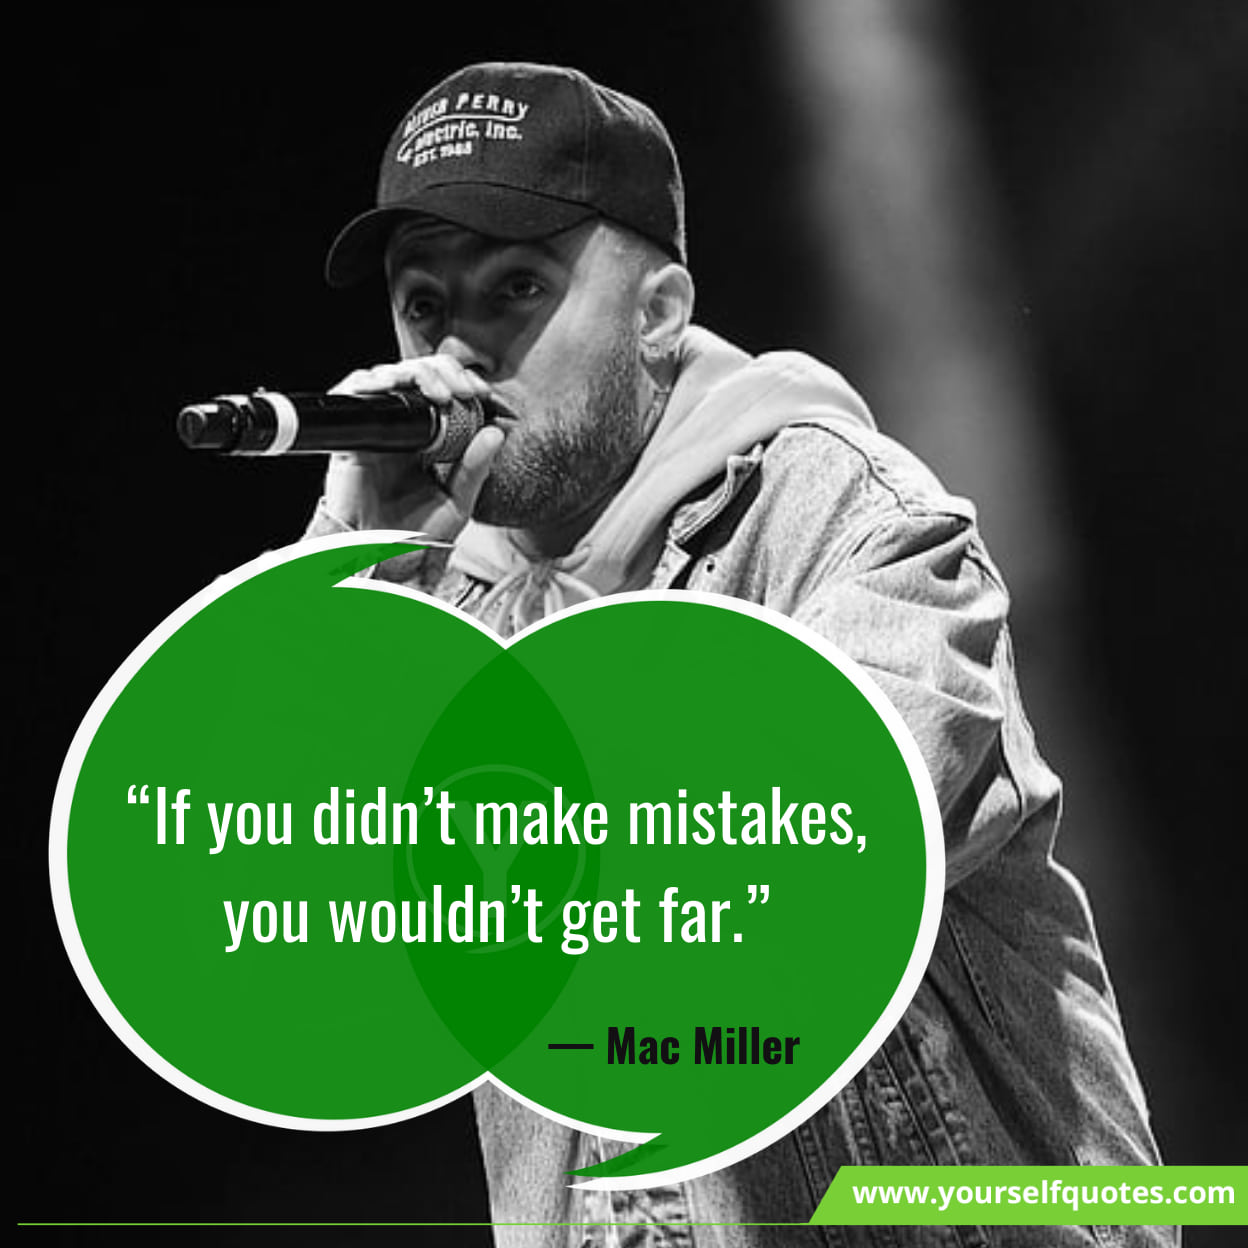 Mac Miller Famous Quotes